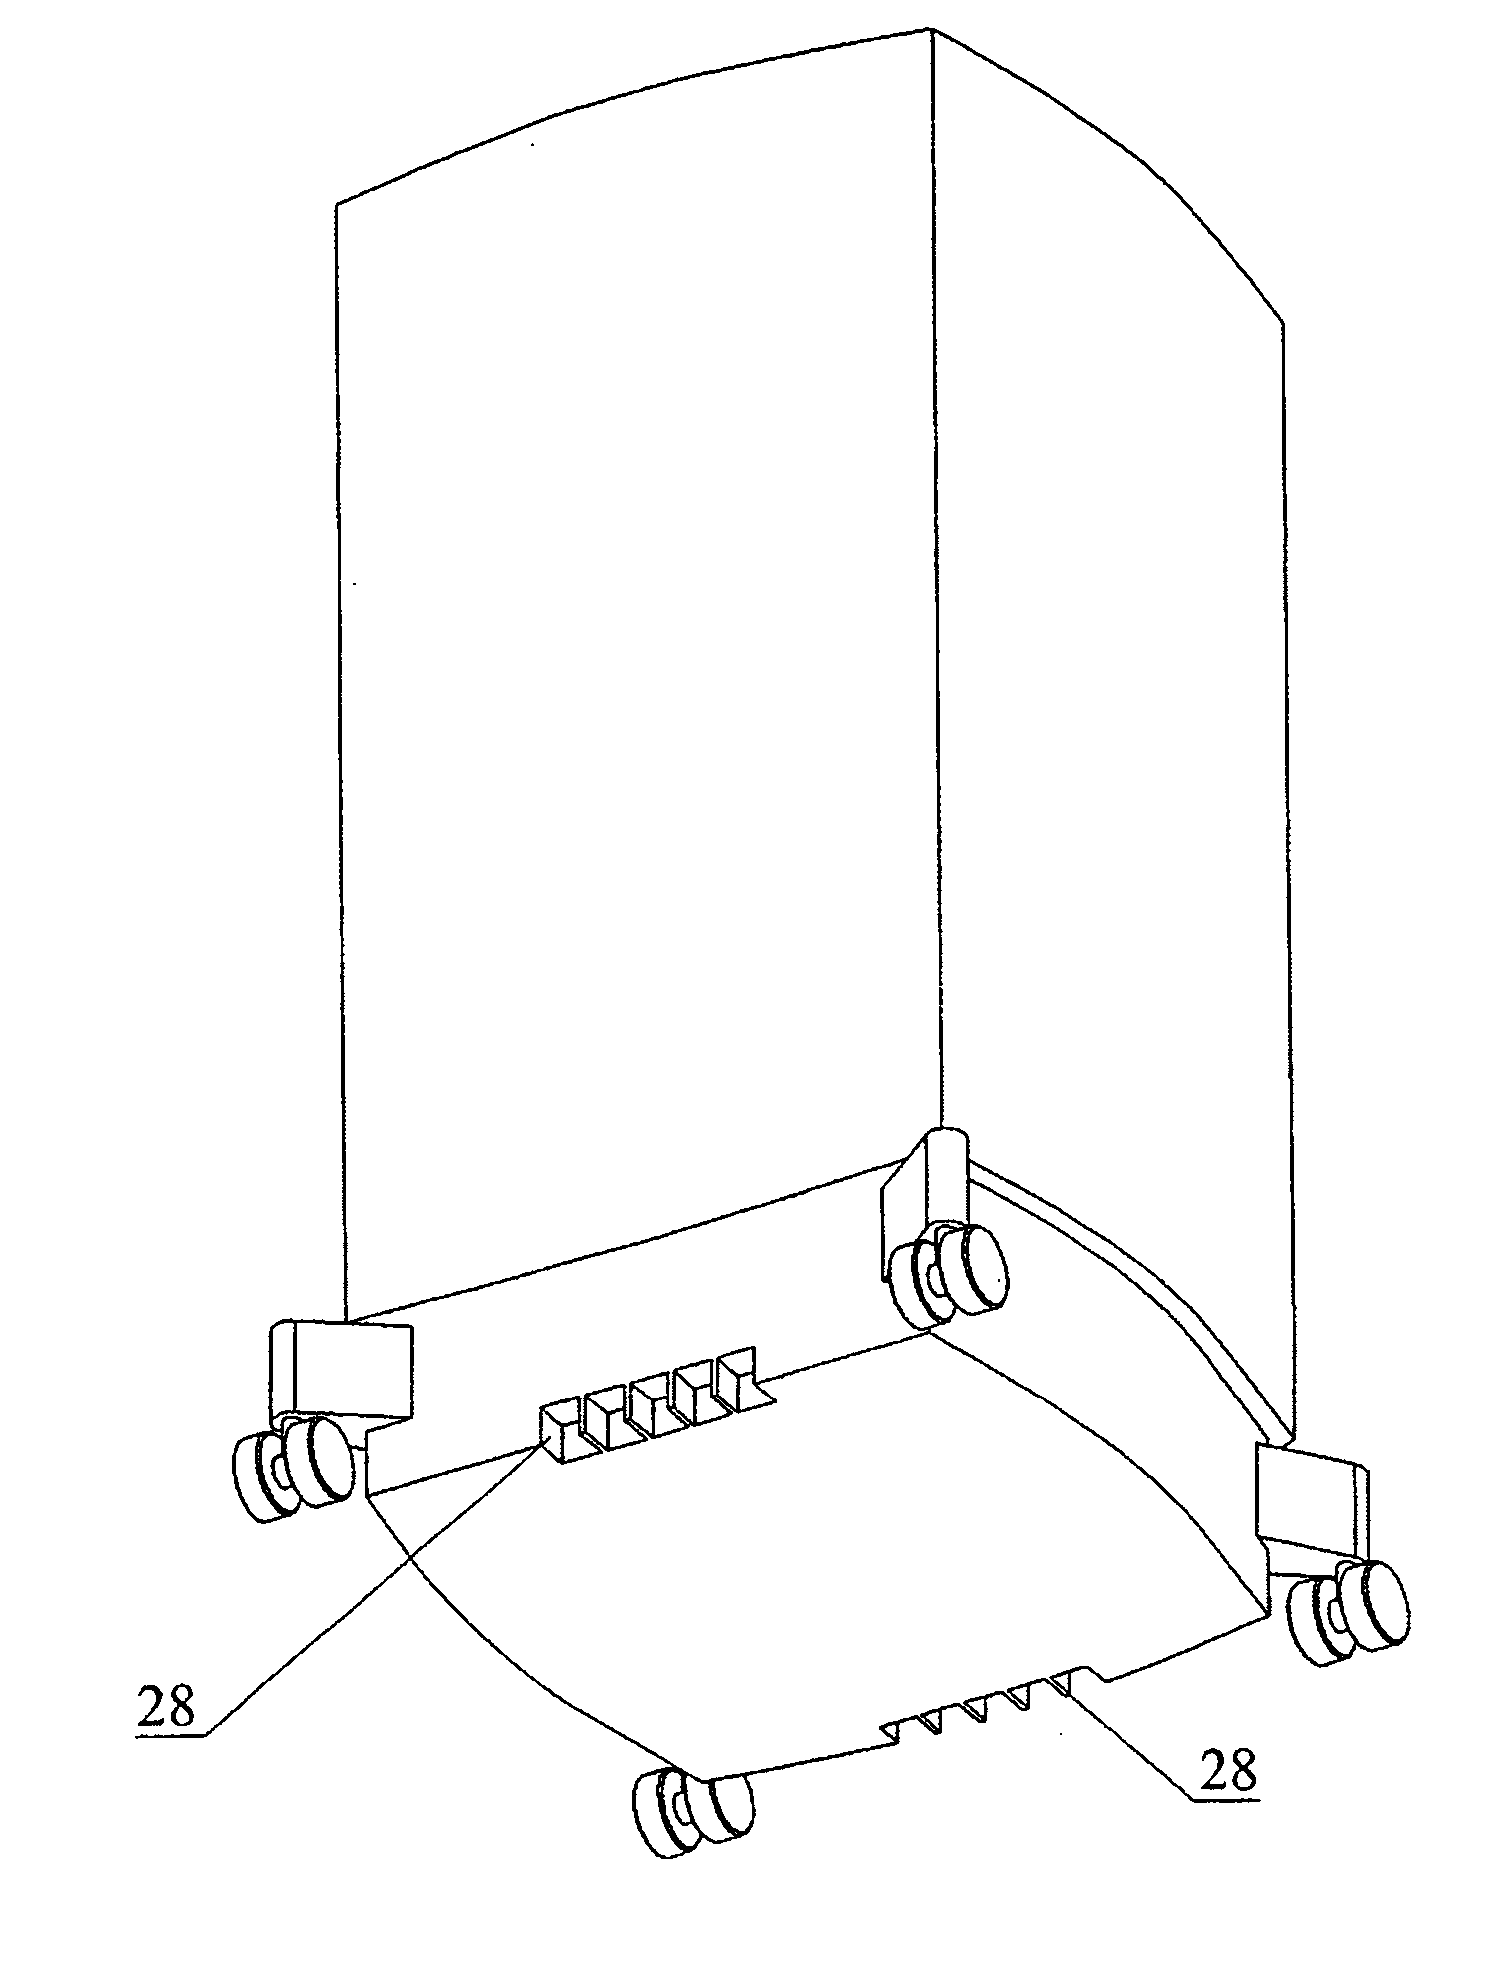 Exhaust conduit and adapter mounting for portable oxygen concentrator